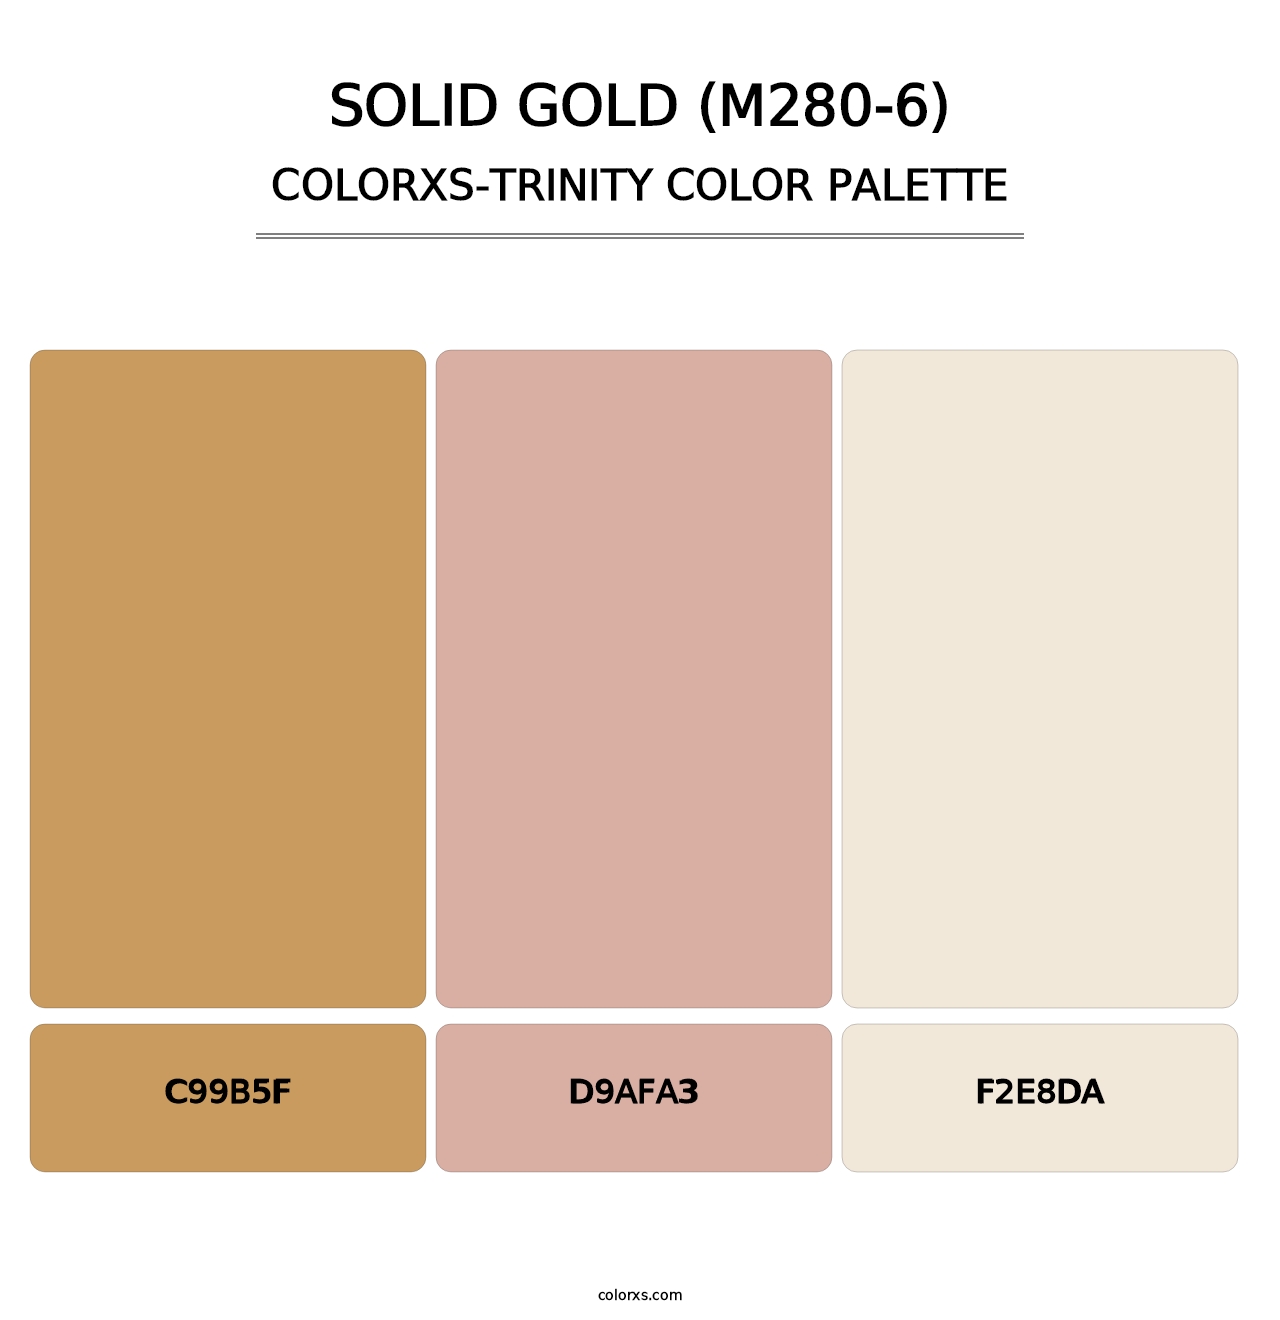 Solid Gold (M280-6) - Colorxs Trinity Palette